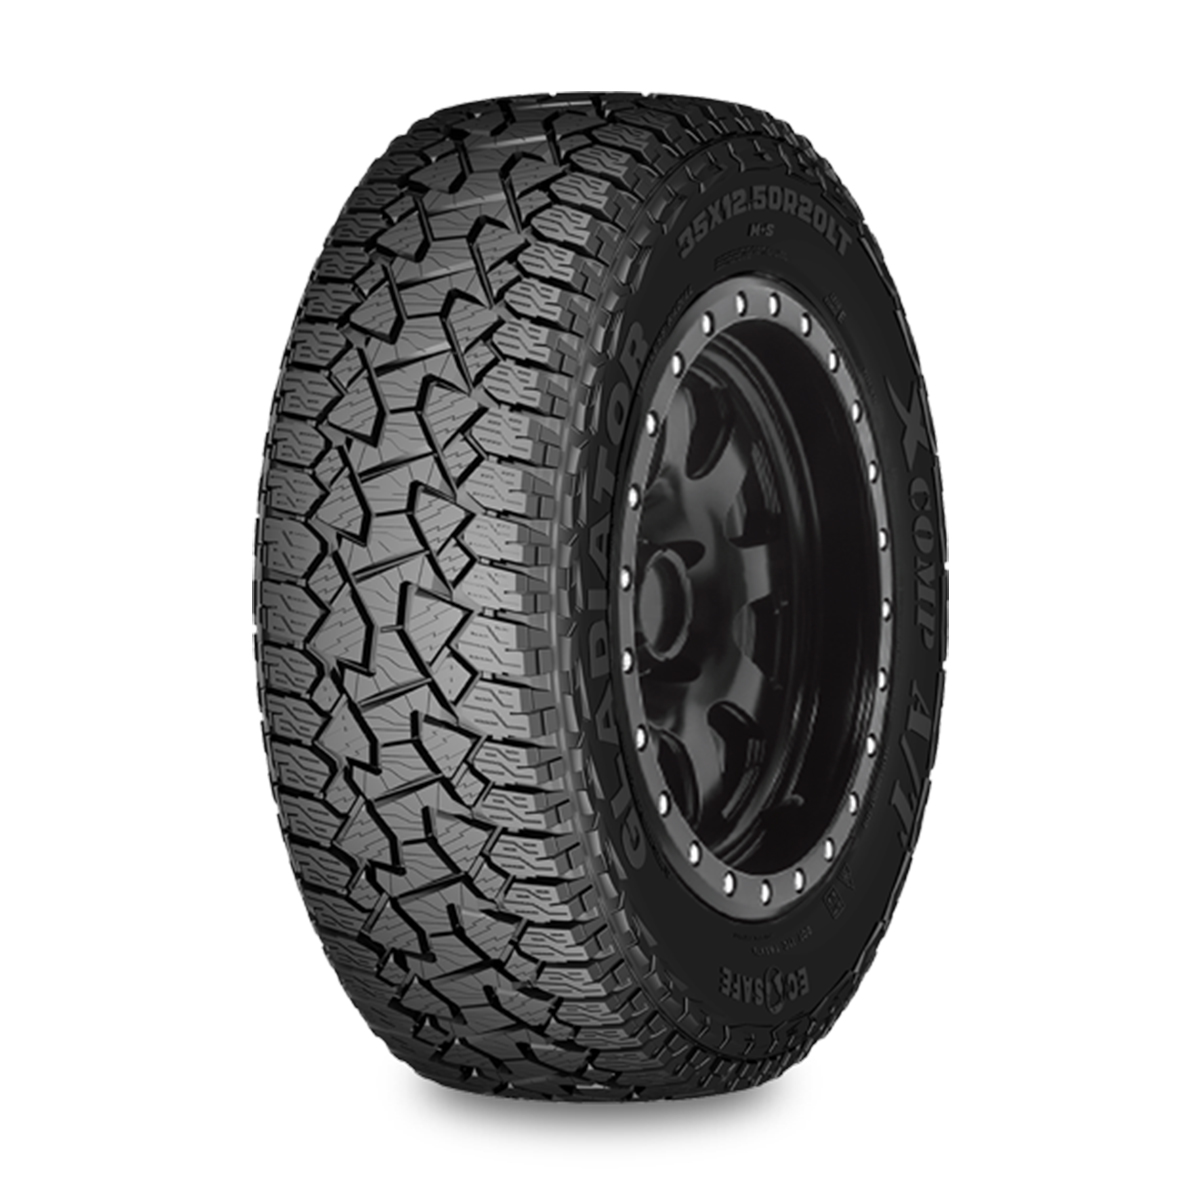 https://www.onlinetires.com/media/catalog/product/X/_/X_COMP_AT_FULL_3.jpg?width=265&height=265&store=owd&image-type=image